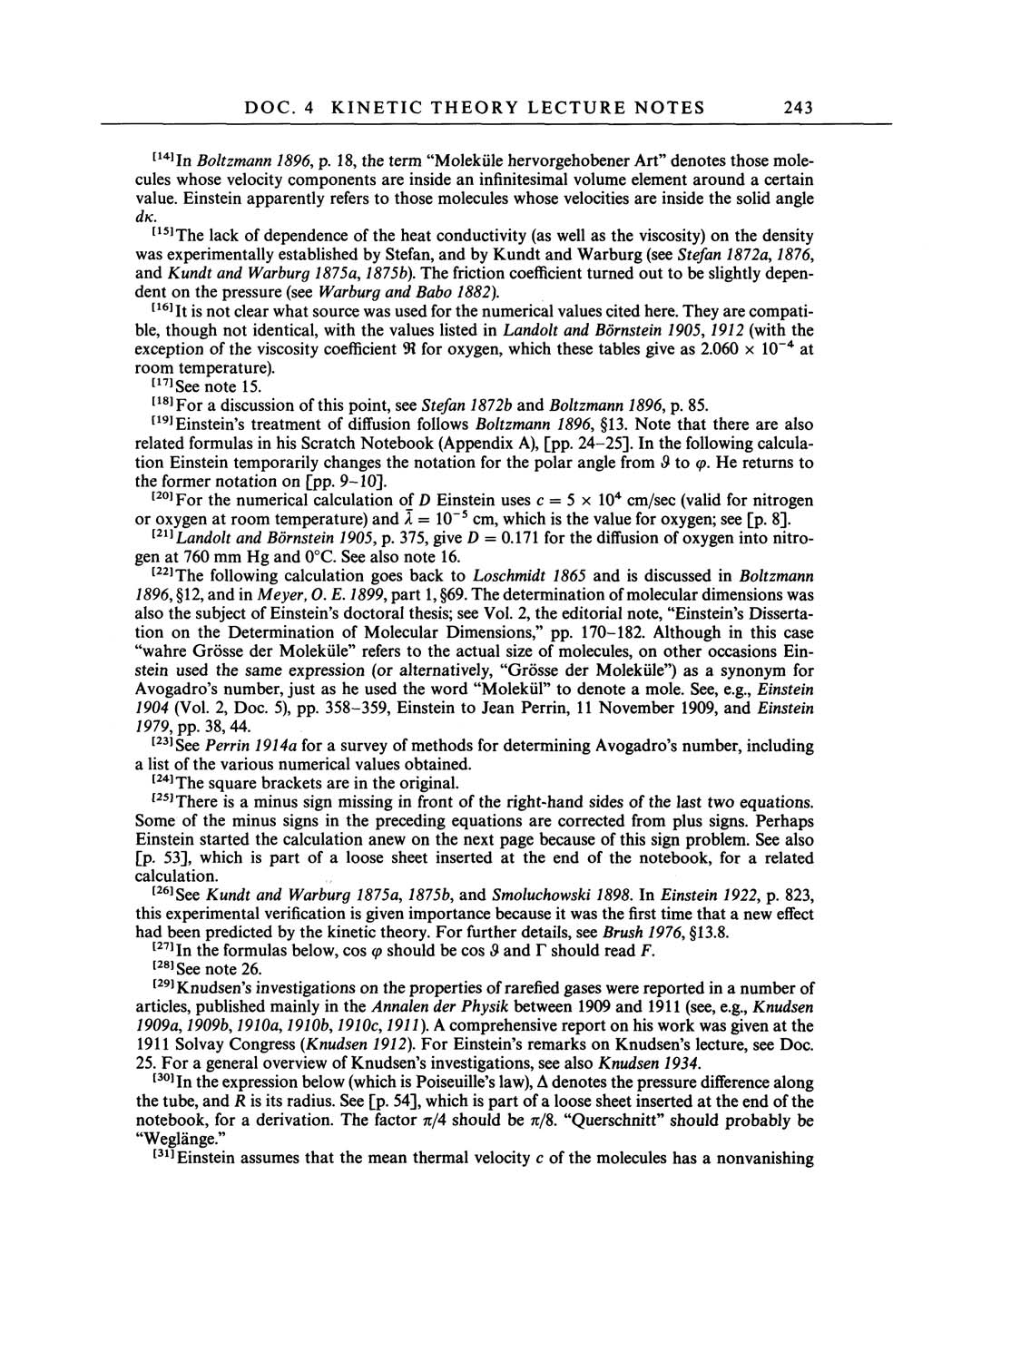 Volume 3: The Swiss Years: Writings 1909-1911 page 243